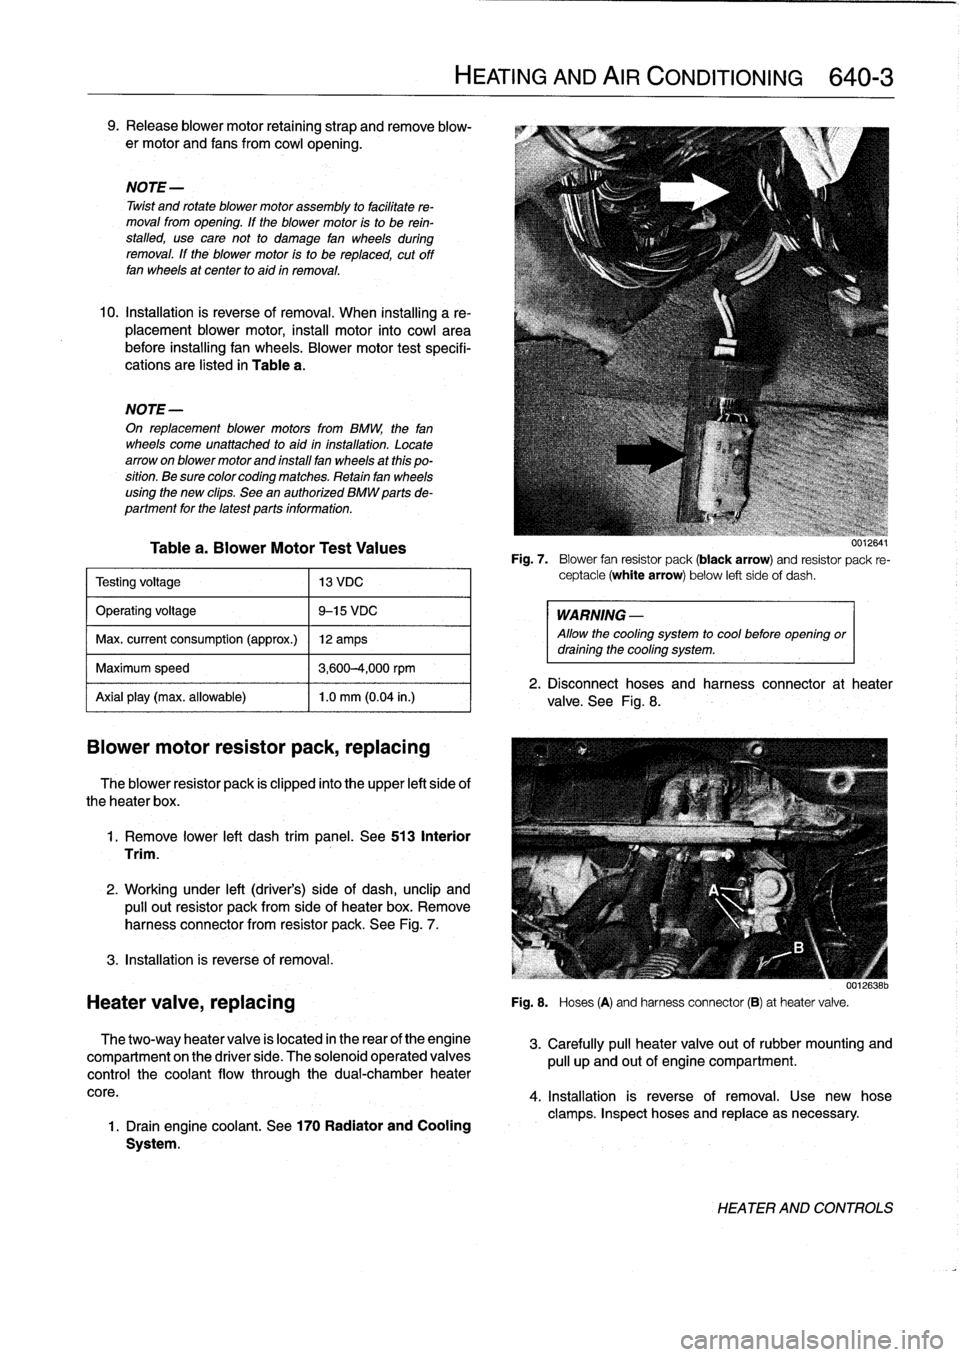 BMW 318i 1998 E36 Owners Manual 
9
.
Release
blower
motor
retaining
strap
andremove
blow-
er
motor
and
fans
fromcowl
opening
.

NOTE-

Twist
and
rotate
blowermotor
assembly
to
facilítate
re-
moval
from
opening
.
If
the
blower
motor